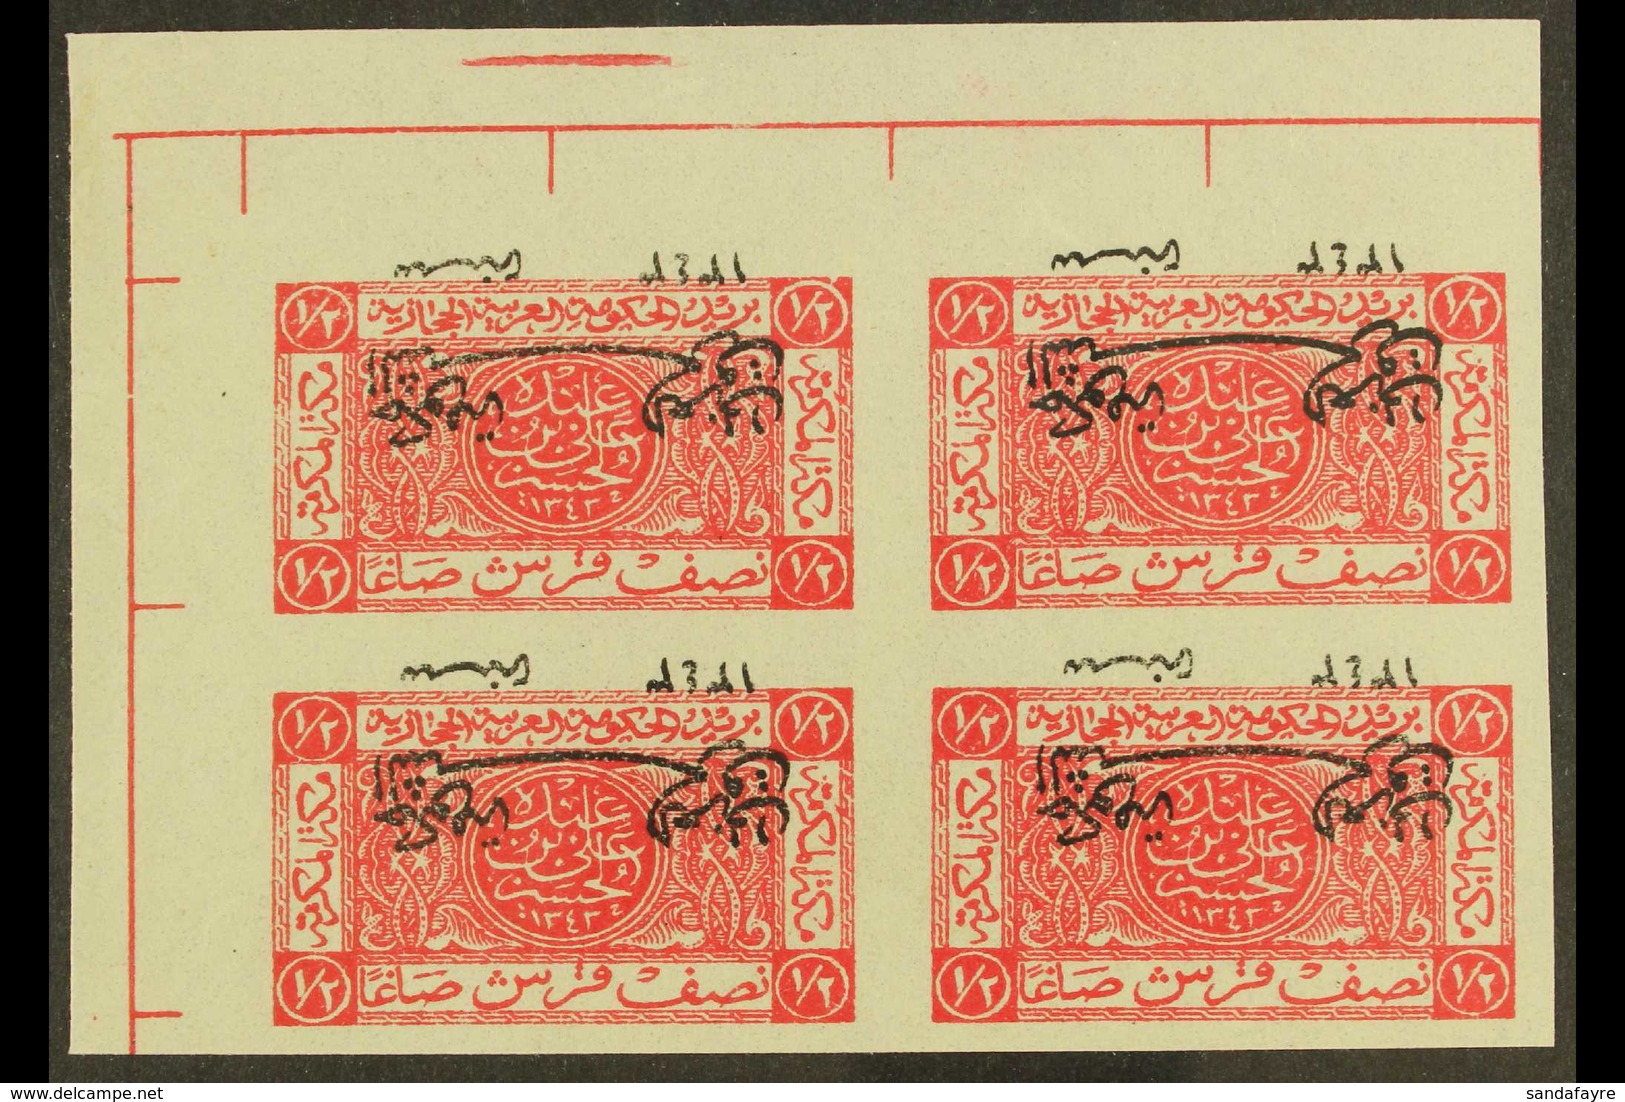 1925 (2 Aug) ½p Carmine IMPERF WITH INVERTED OVERPRINT (as SG 137a) BLOCK OF FOUR On Gummed Paper, From The Upper Left C - Giordania